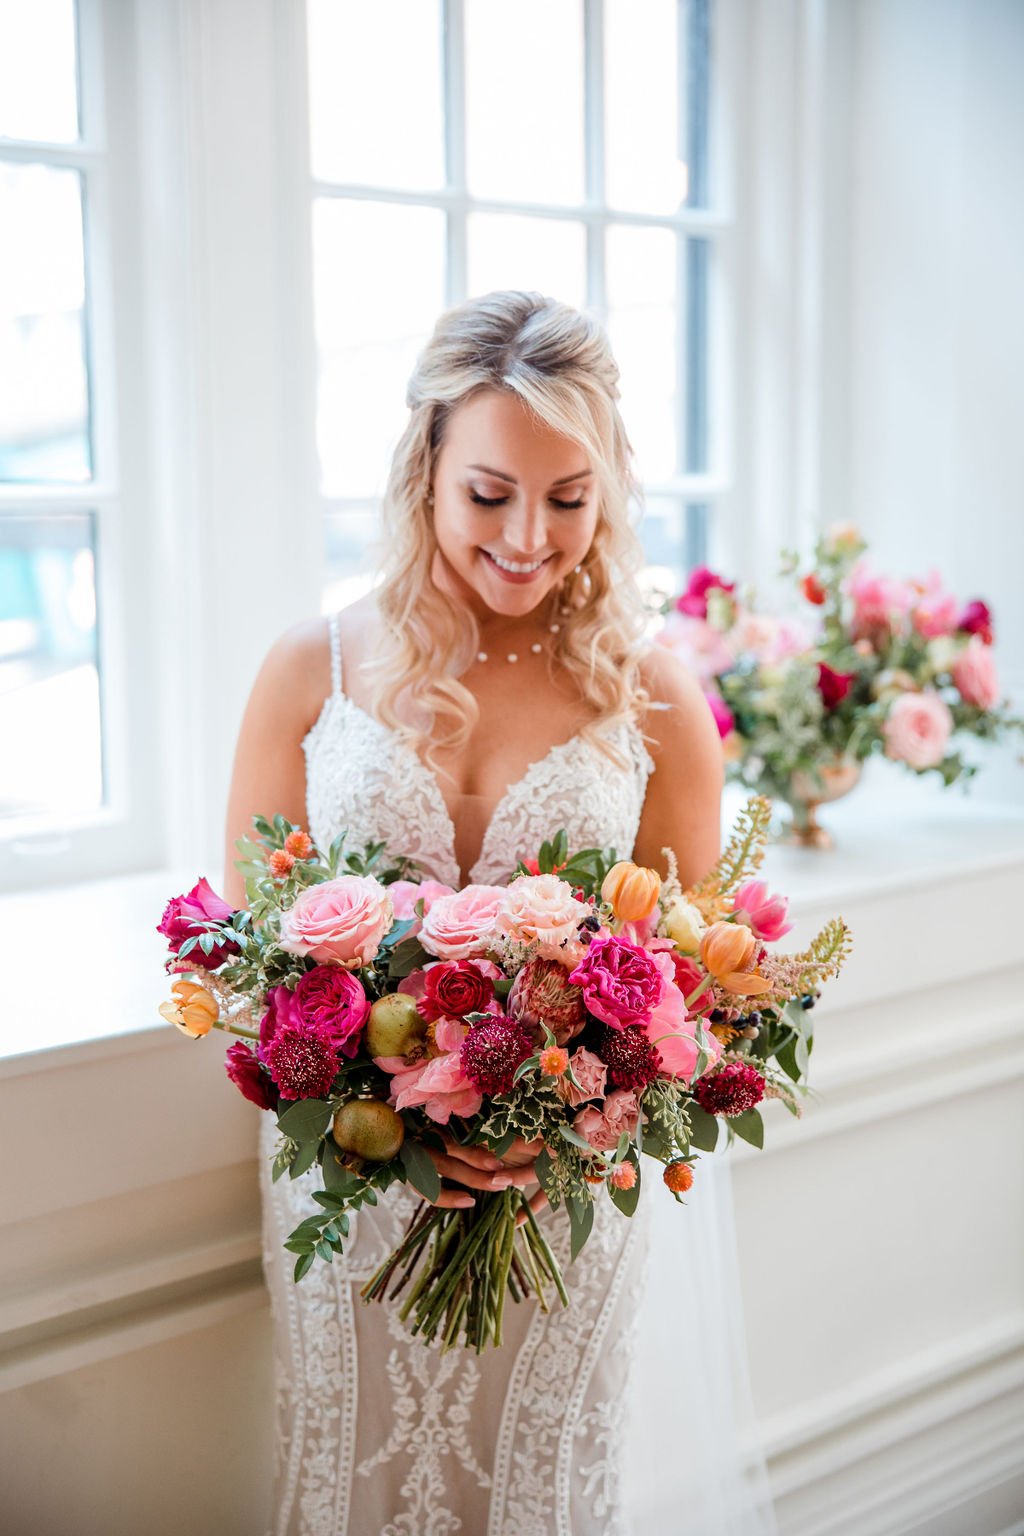 Lush and artful bridal bouquet with textural accents. Balanced color palette of pinks, oranges and muted burgundy tones featuring garden roses, peonies, ranunculus and tulips. Nashville wedding florist at Hotel Noelle.